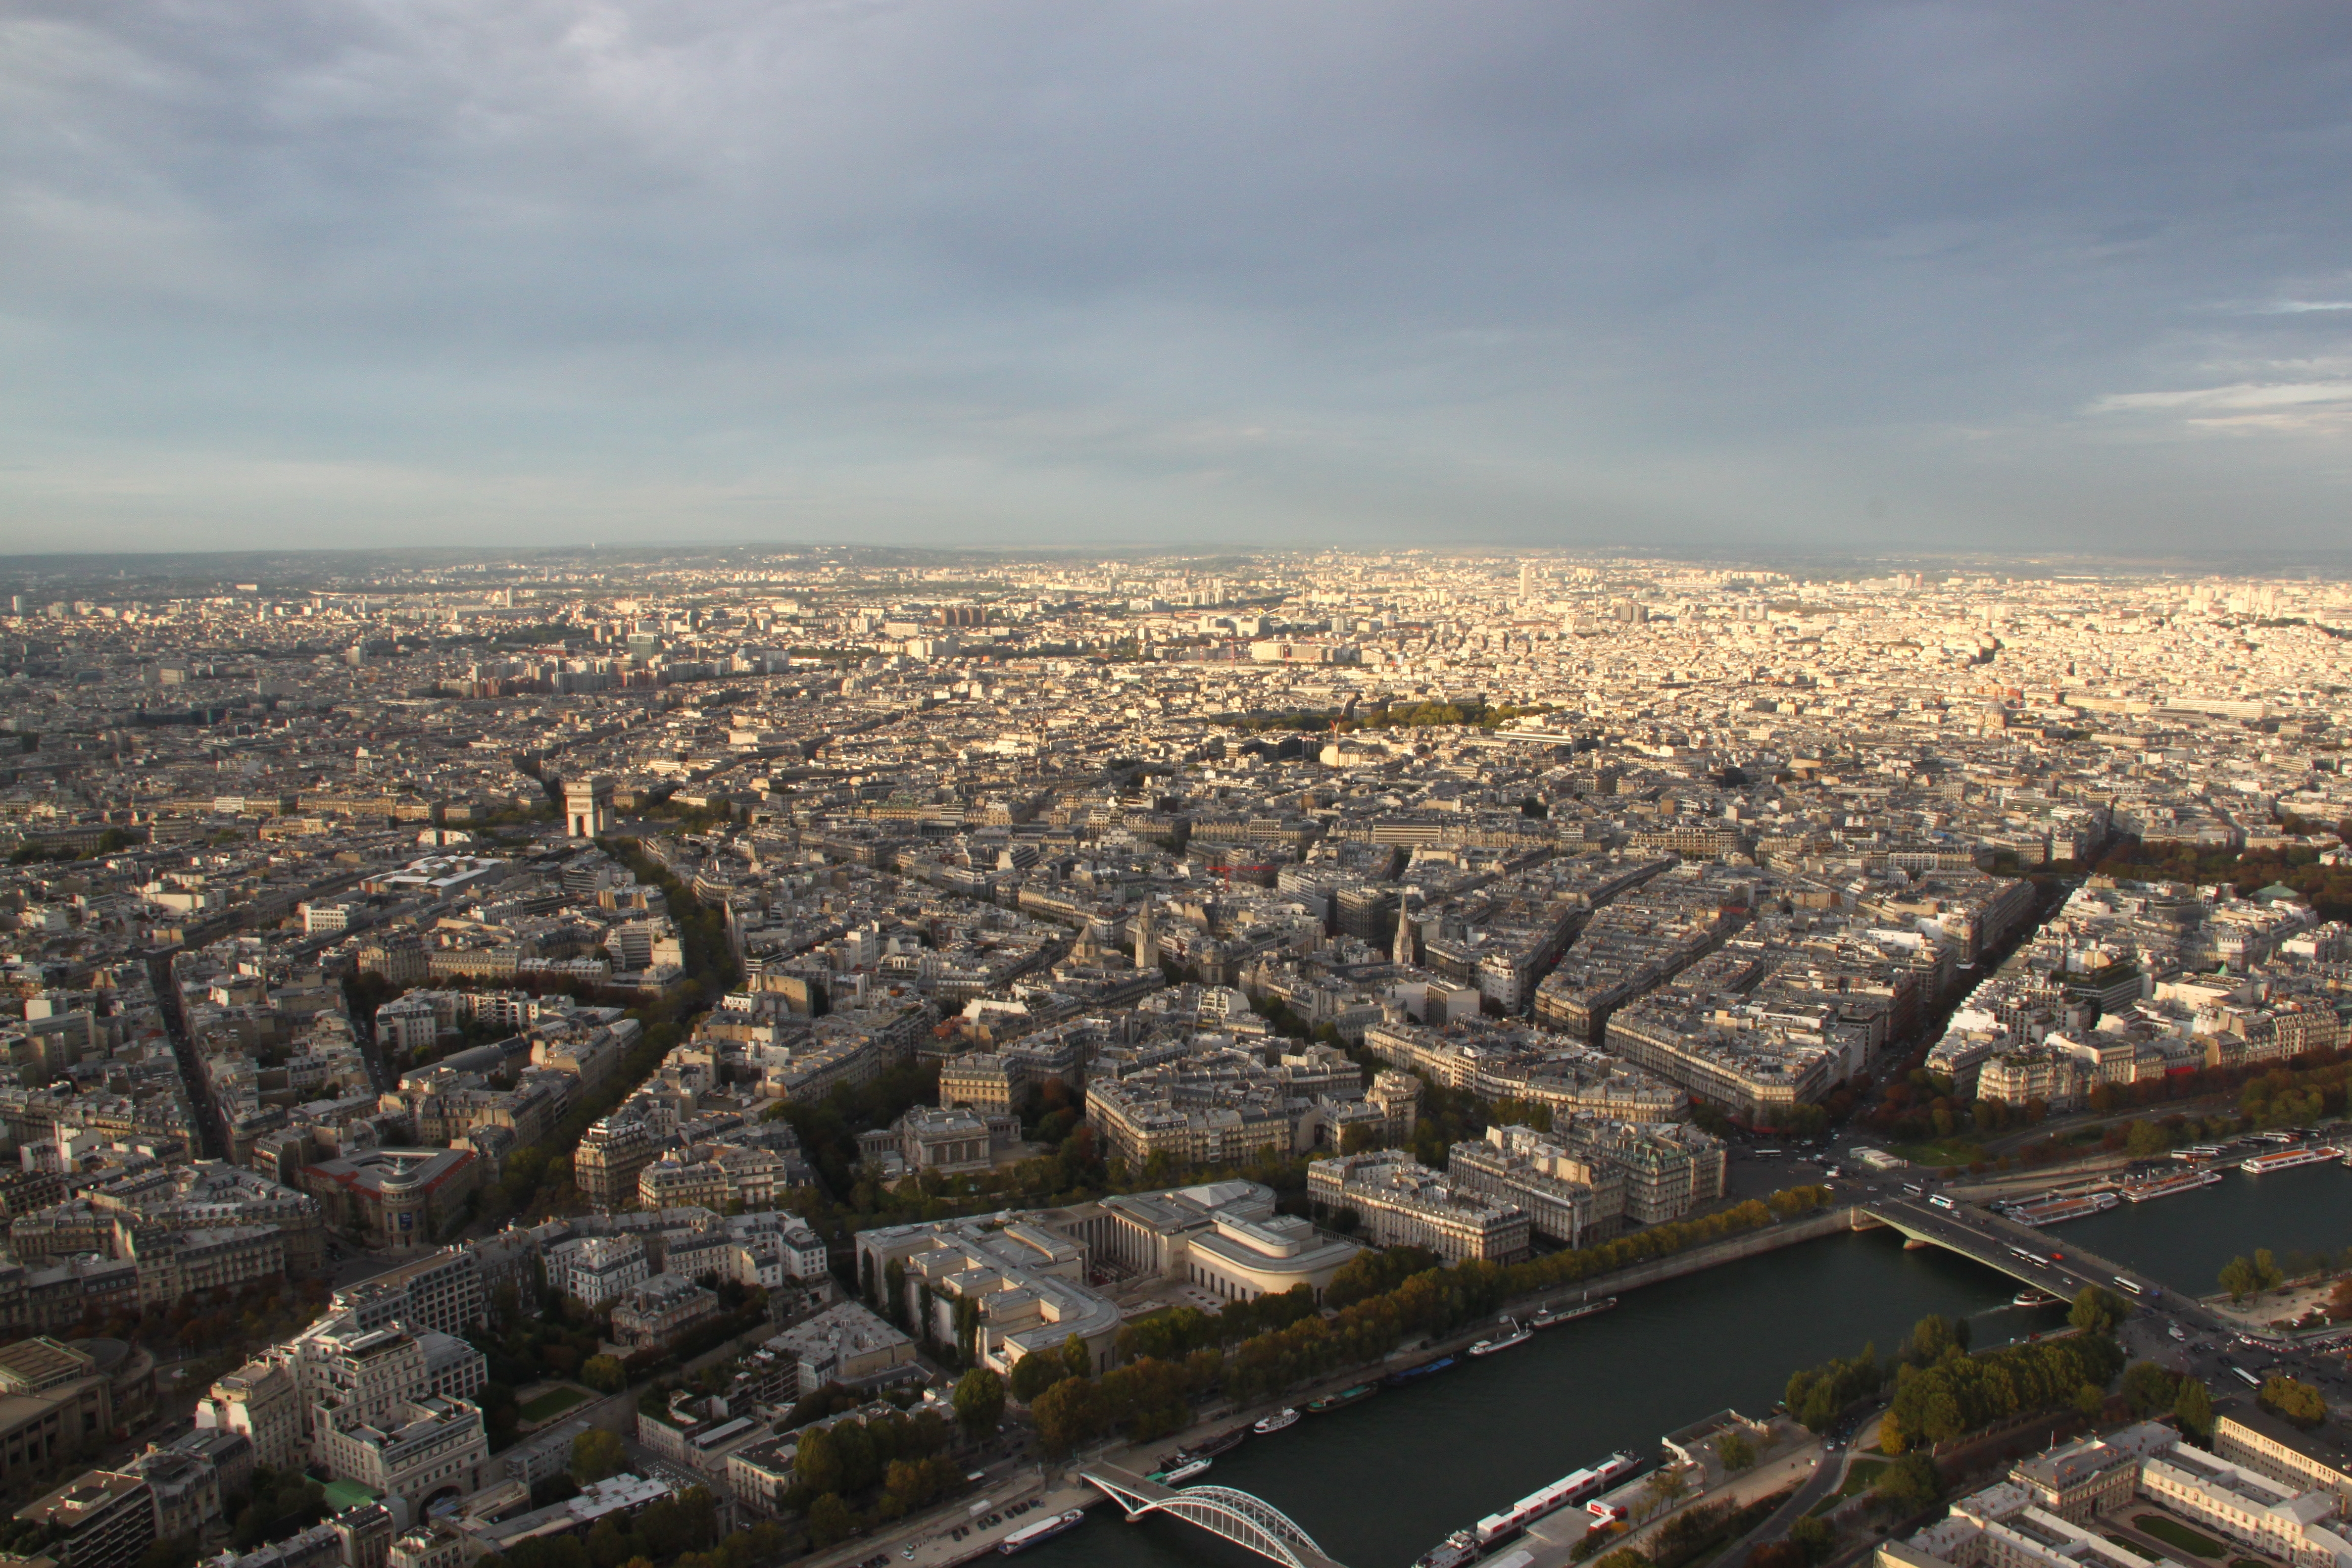 Paris seen from the Eiffel Tower